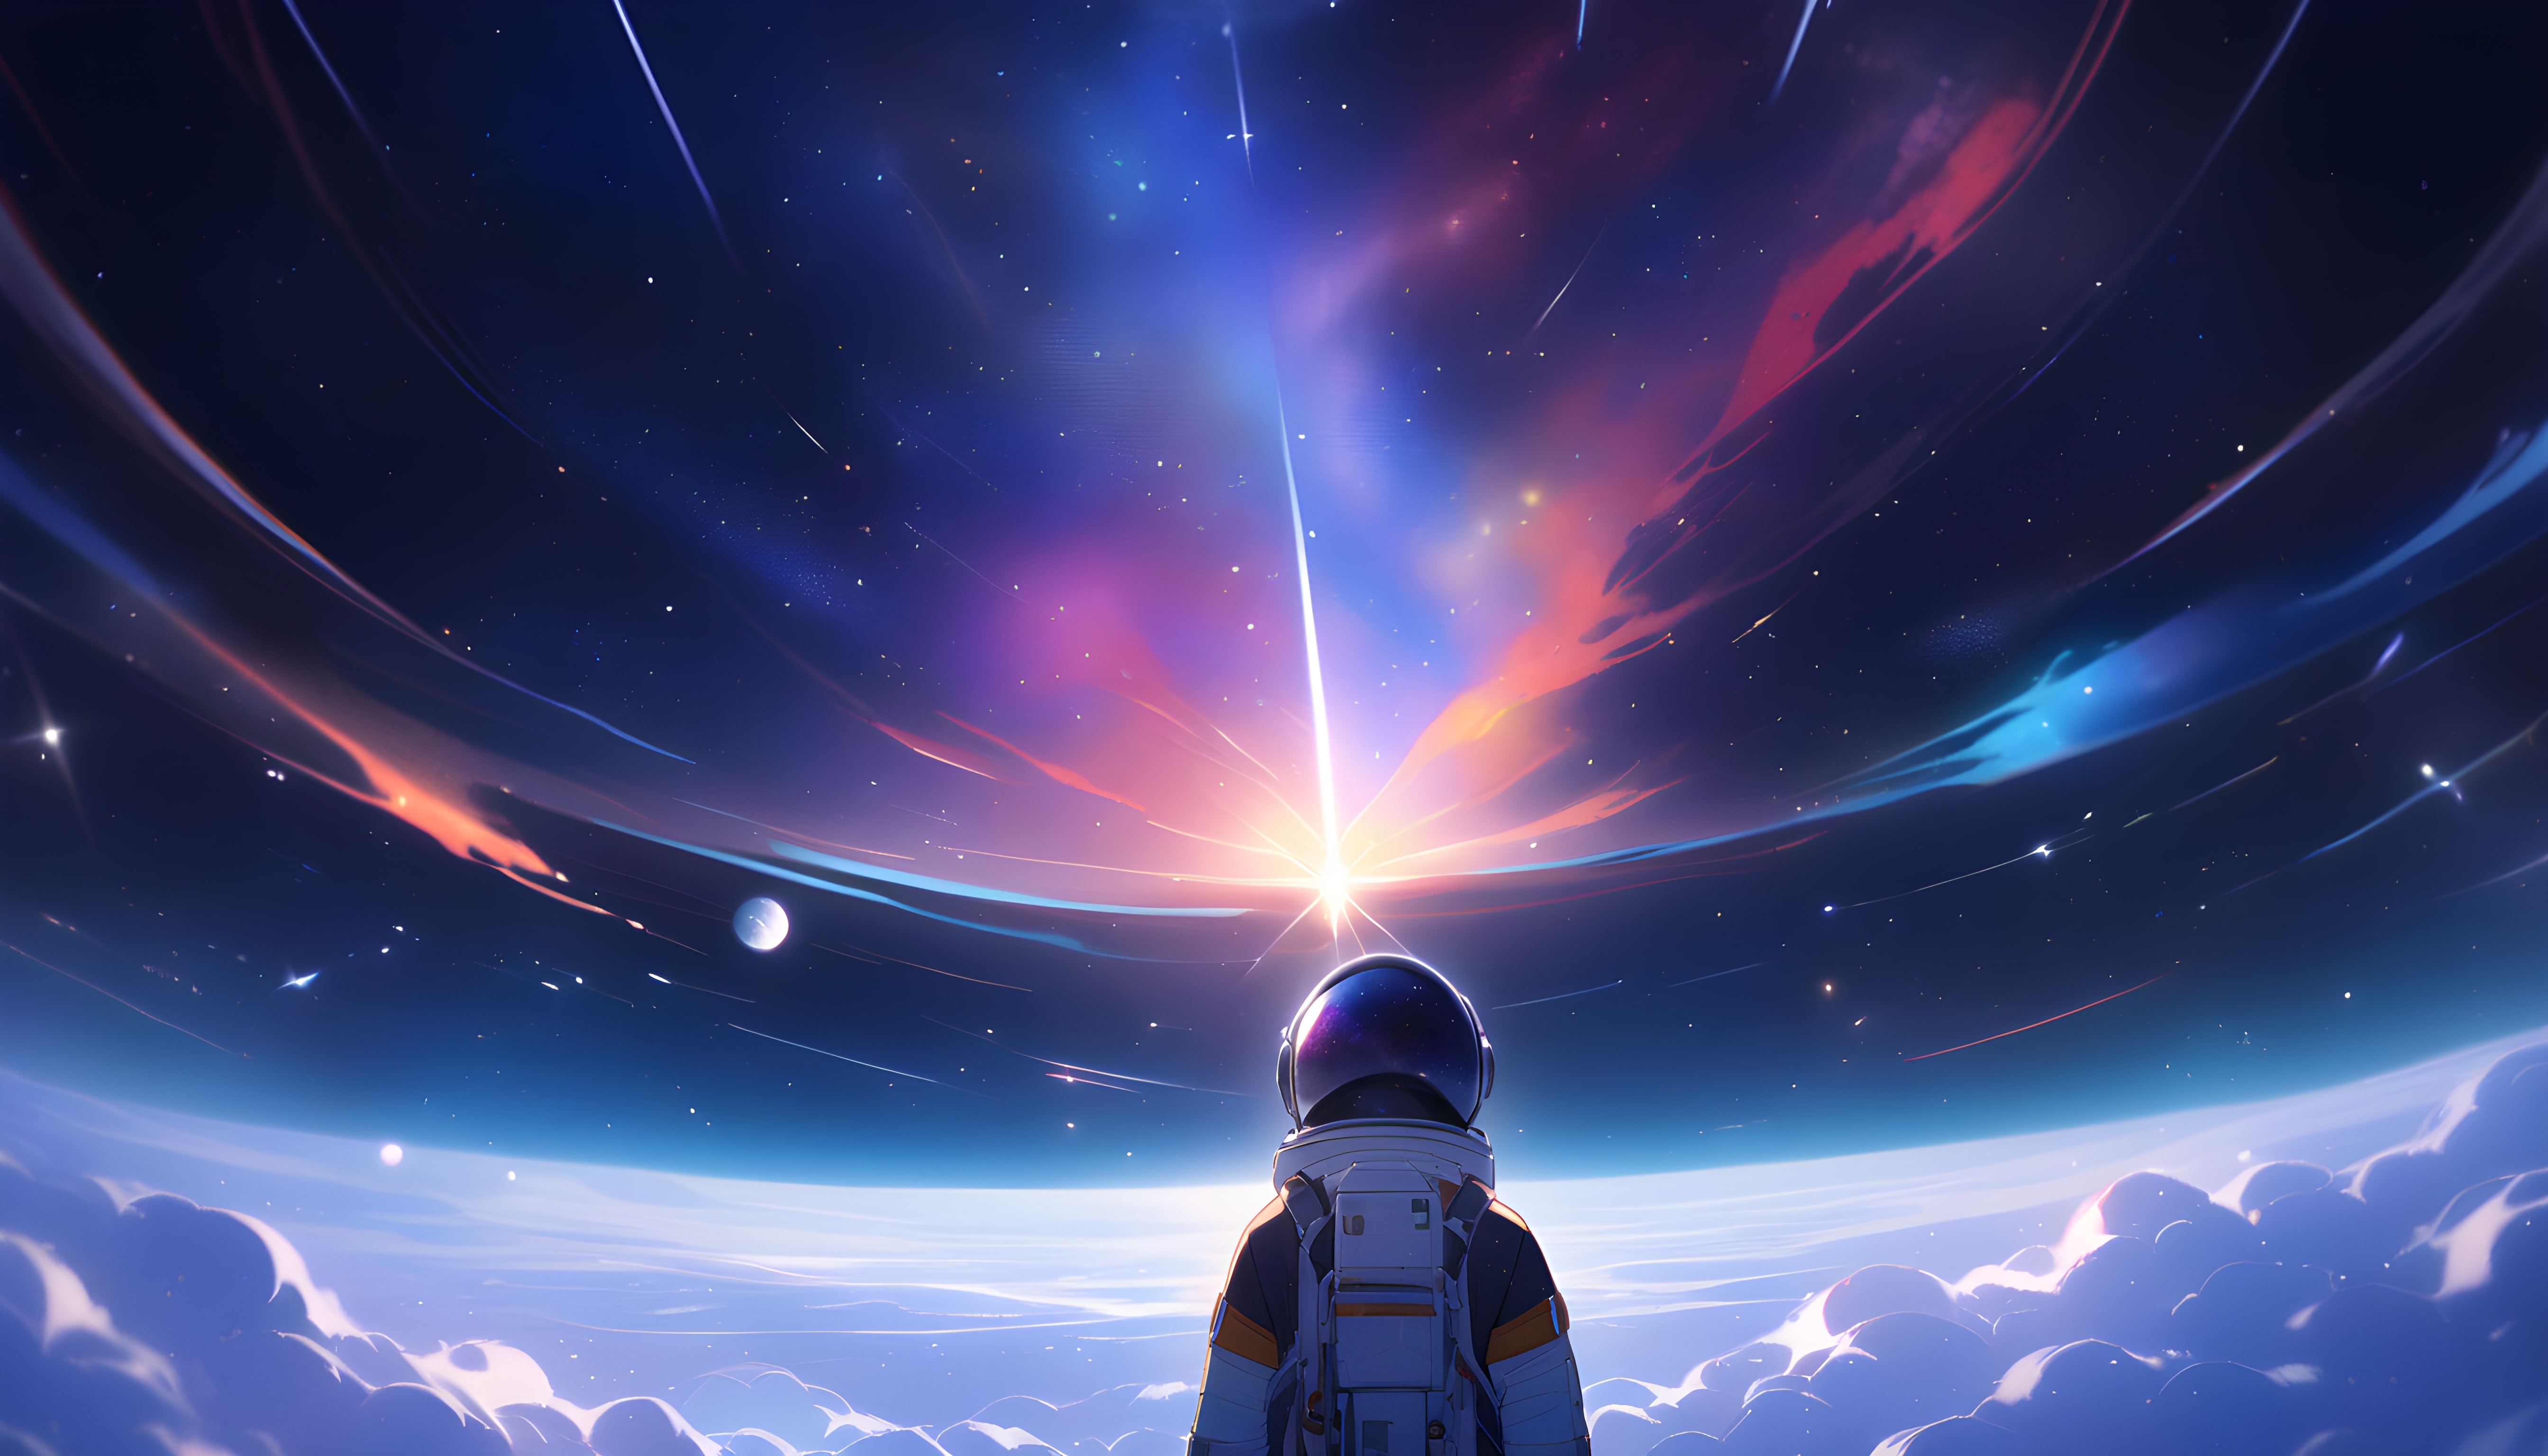 Anime 5376x3072 AI art anime girls space astronaut stars clouds bright spacesuit standing